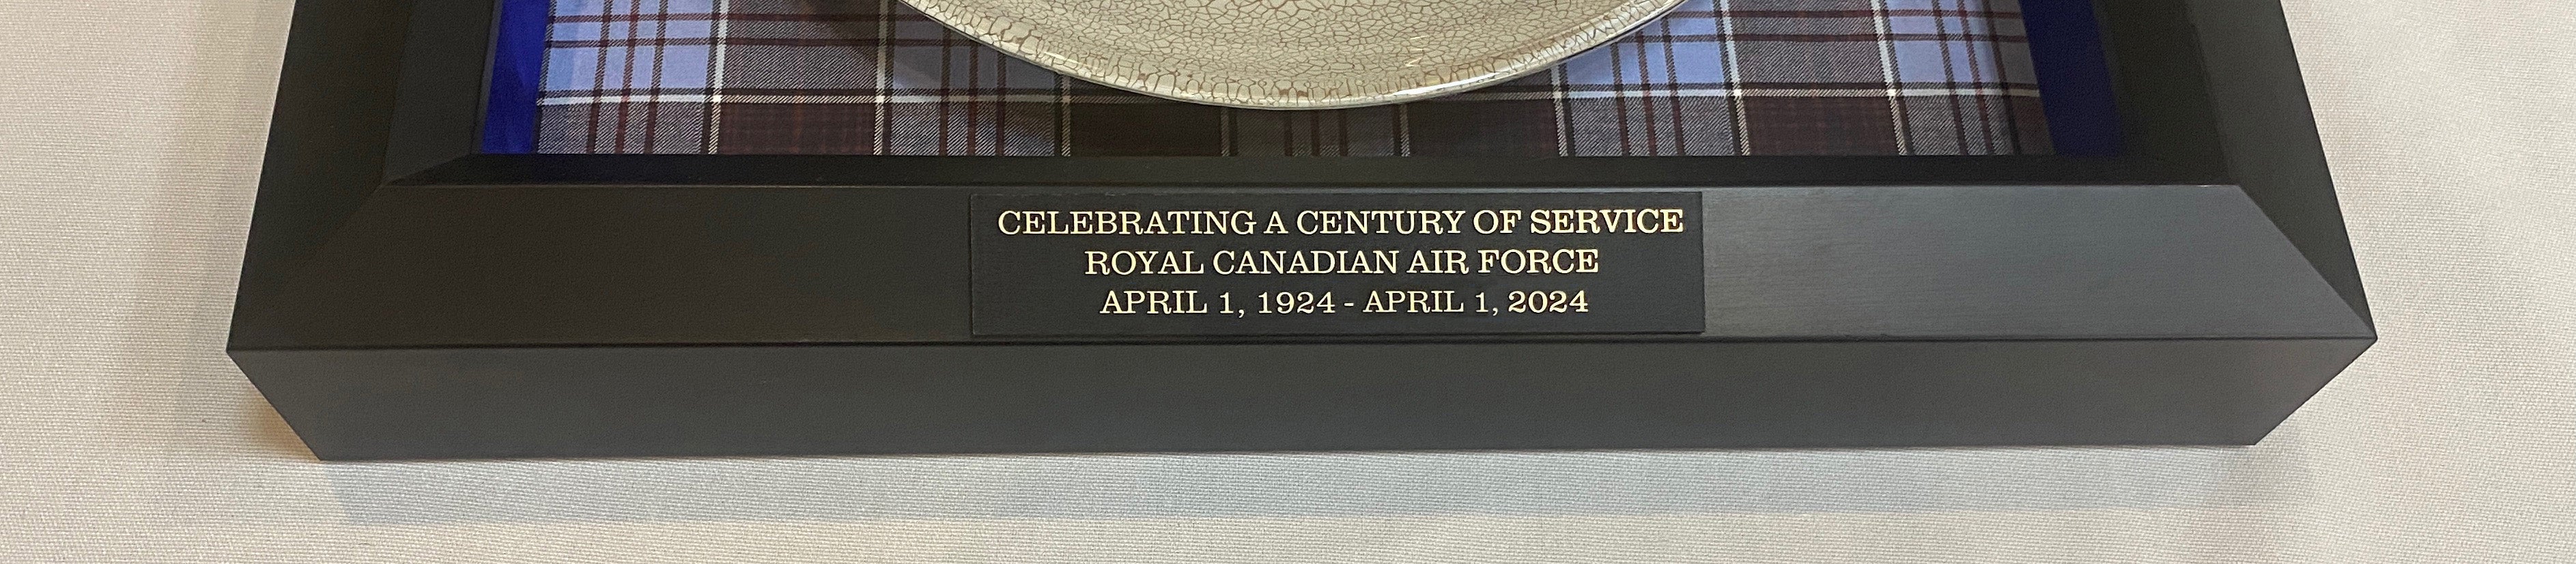 RCAF 100 - Royal Canadian Air Force Centennial Commemorative Plate